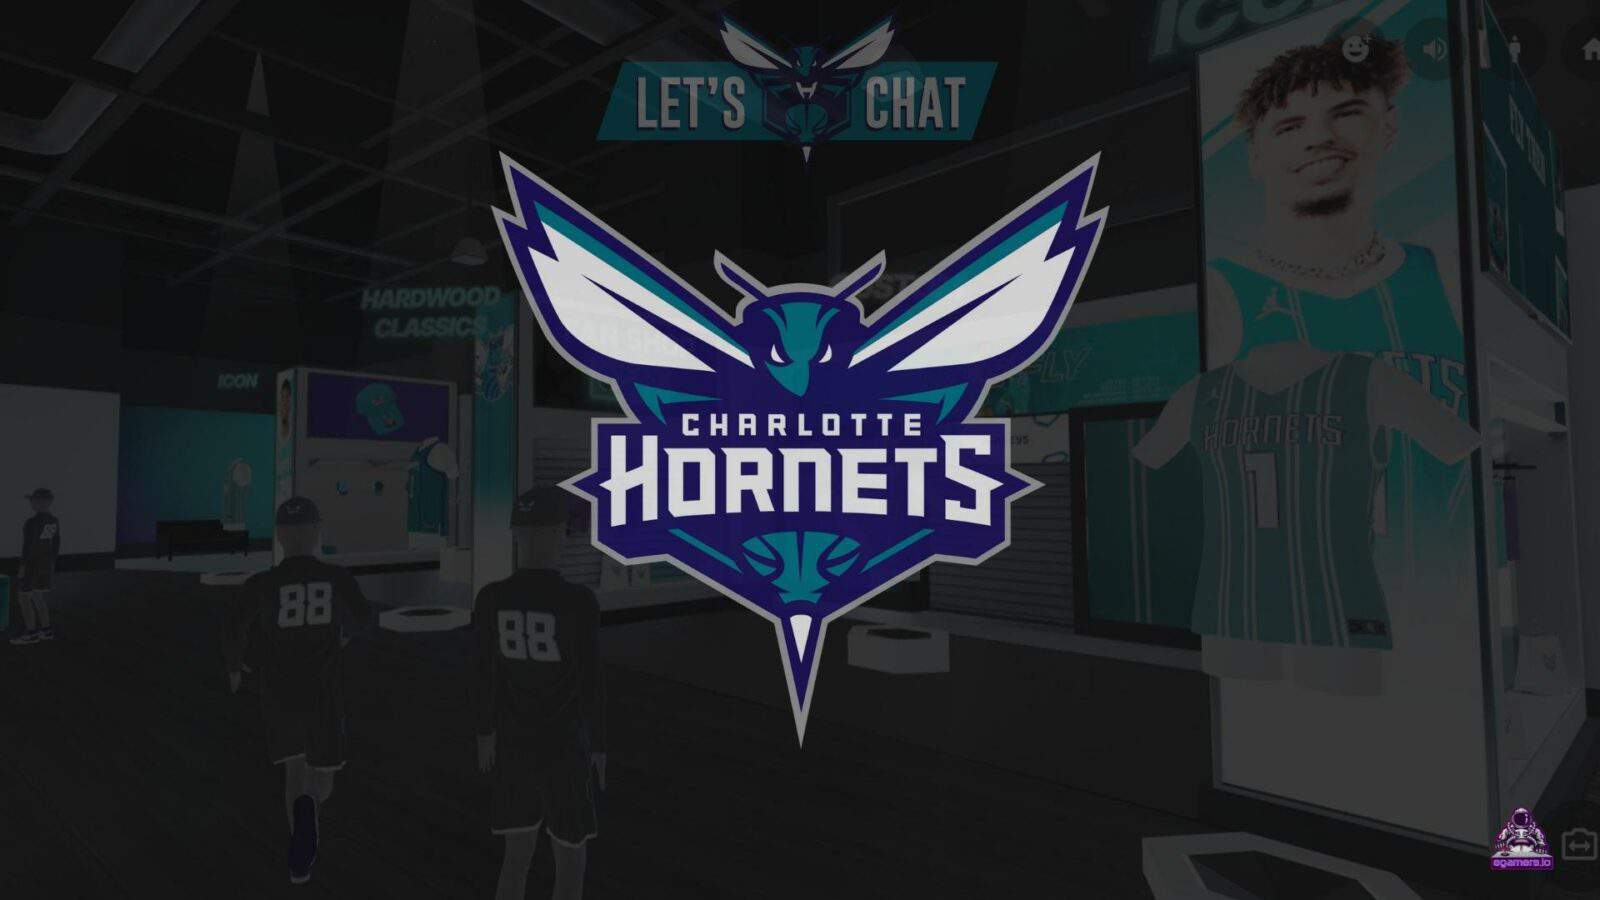 Charlotte Hornets Introduces First NBA Virtual Store in Partnership with MeetKai